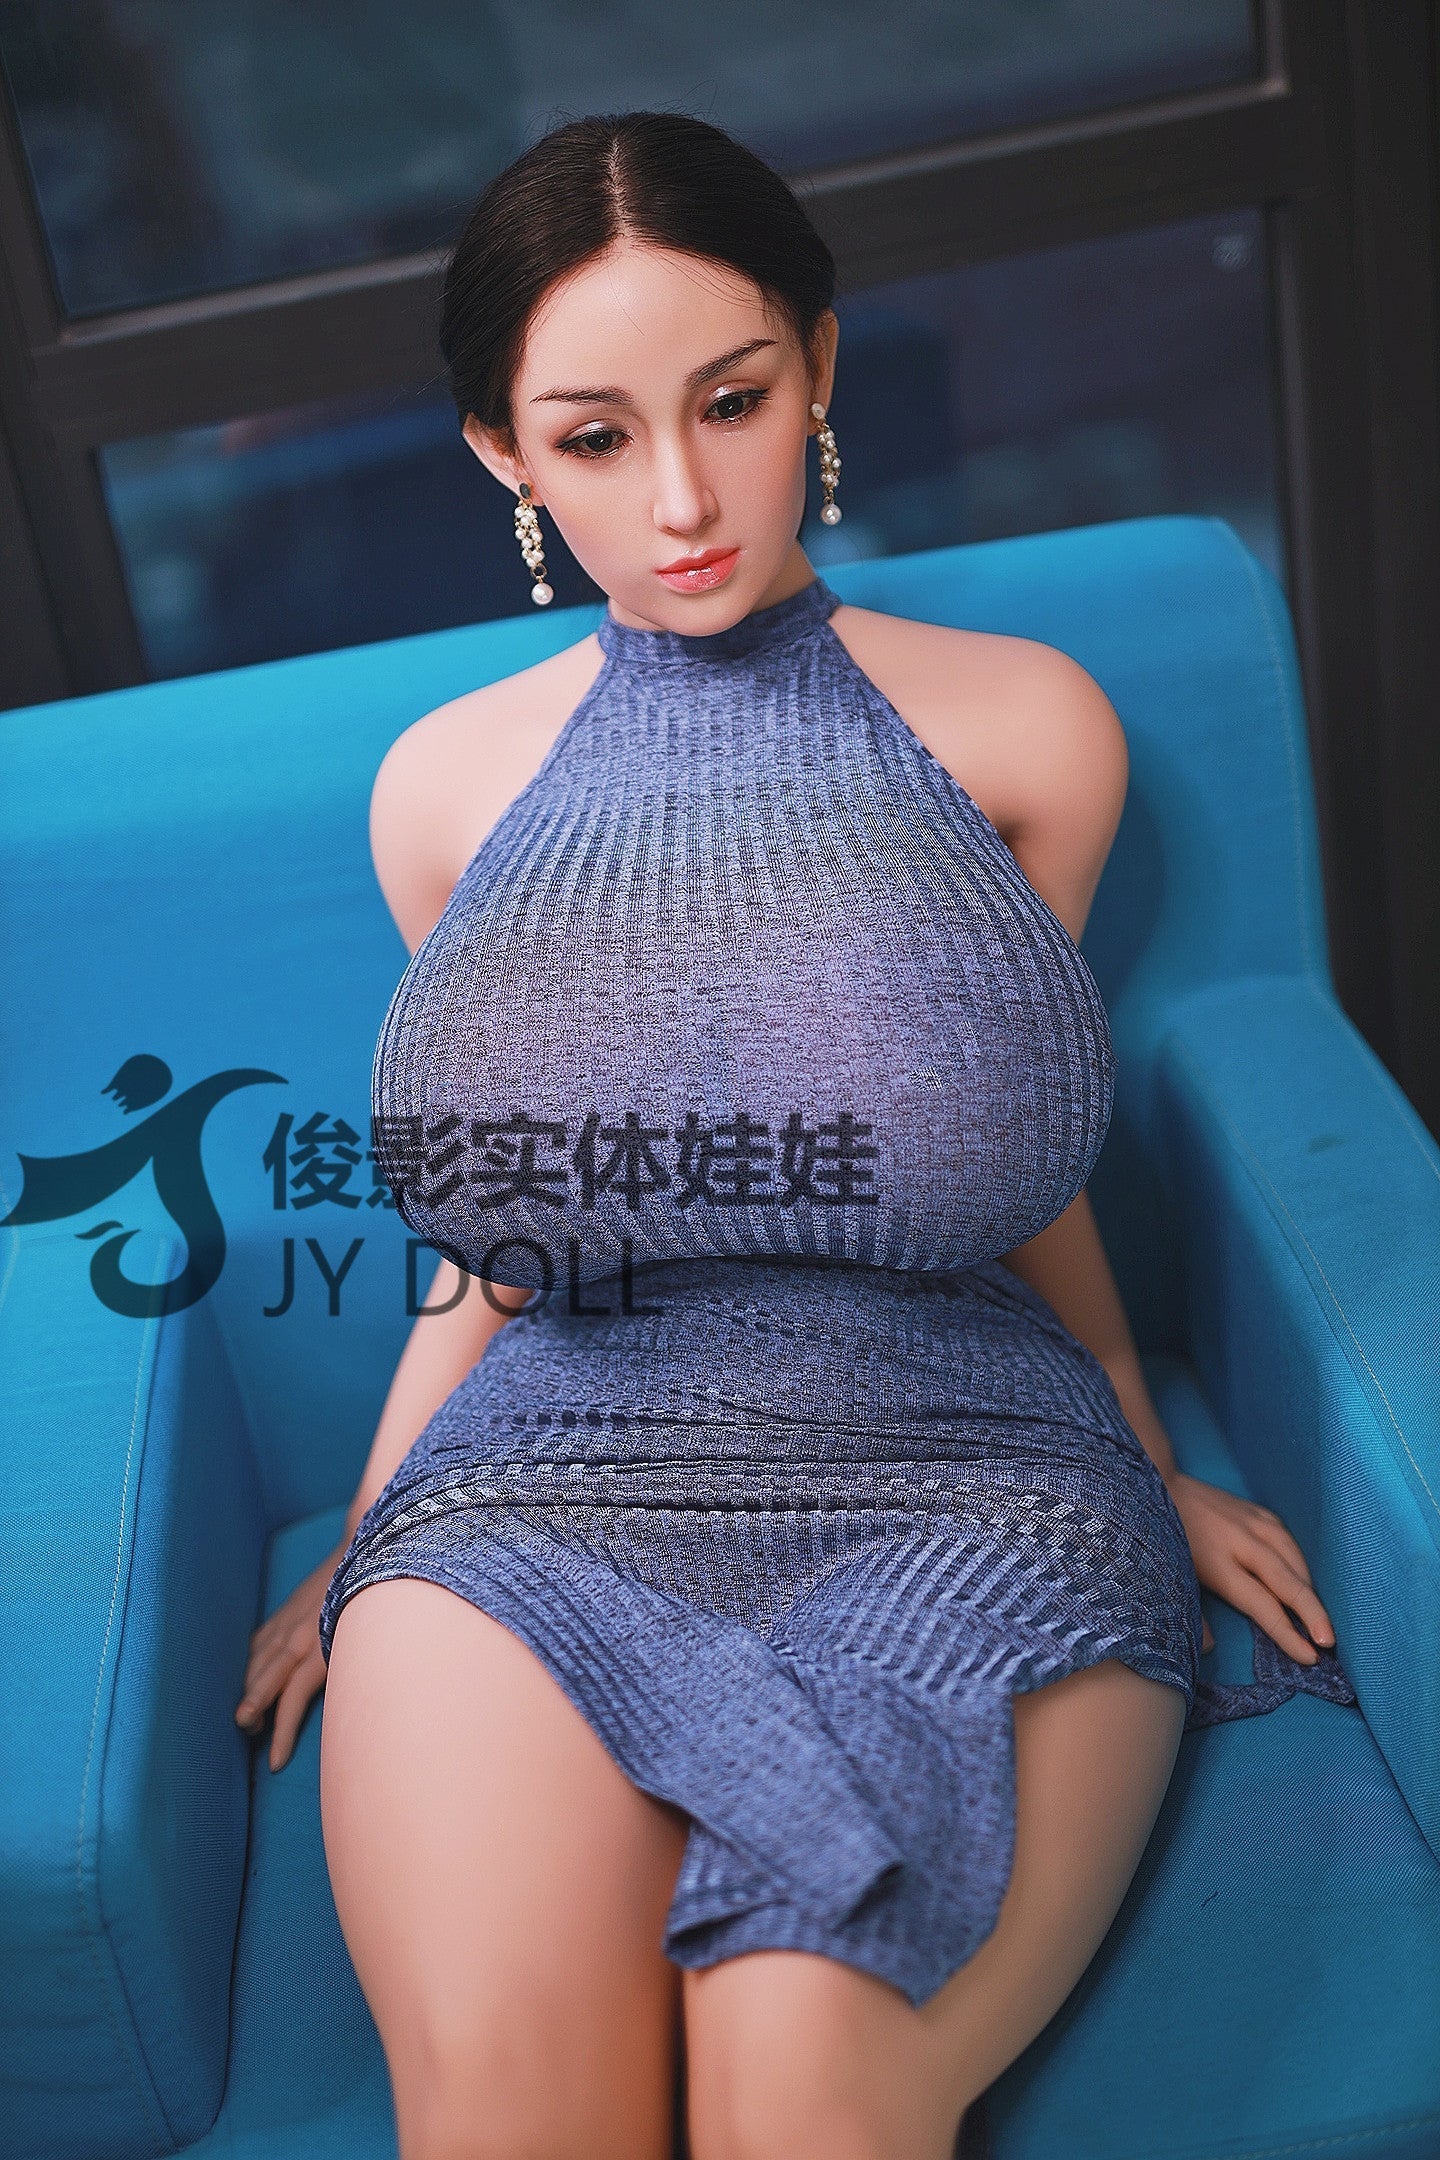 JY Doll 159 cm Fusion - Huge Breast Laura | Buy Sex Dolls at DOLLS ACTUALLY